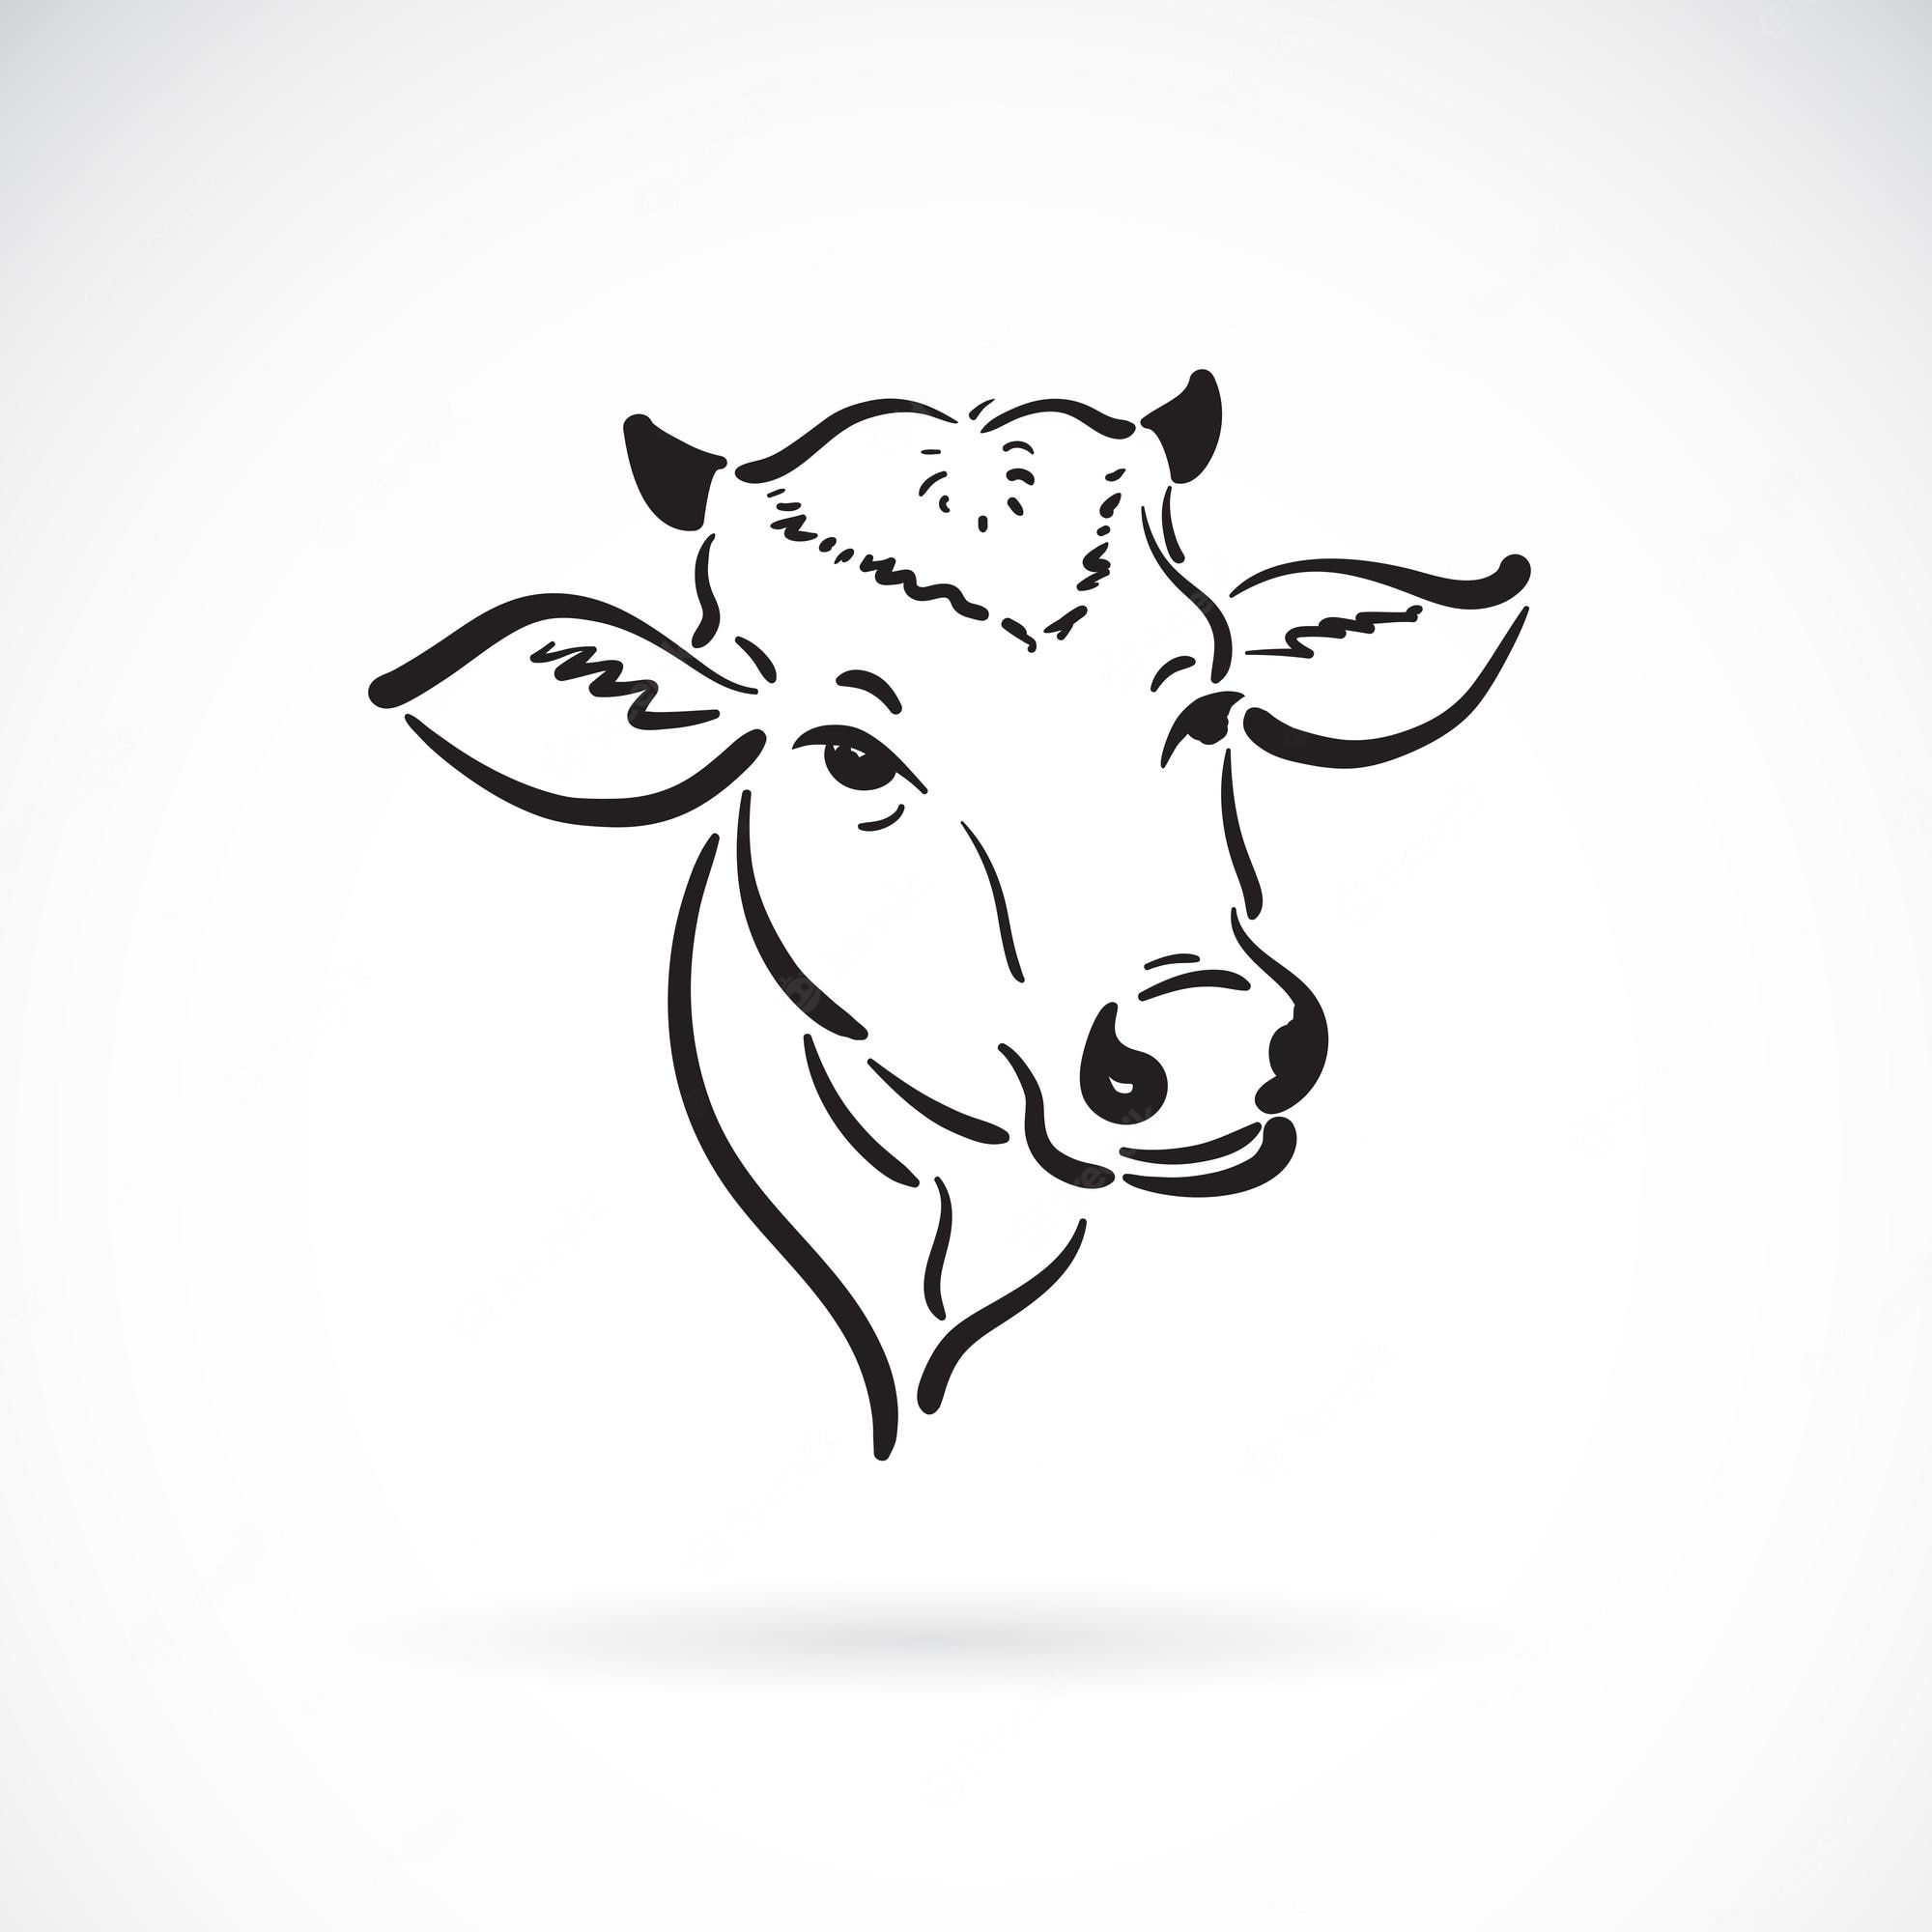 Cow Head Outline Icon Clipart Image Stock Vector (Royalty Free - Clip ...